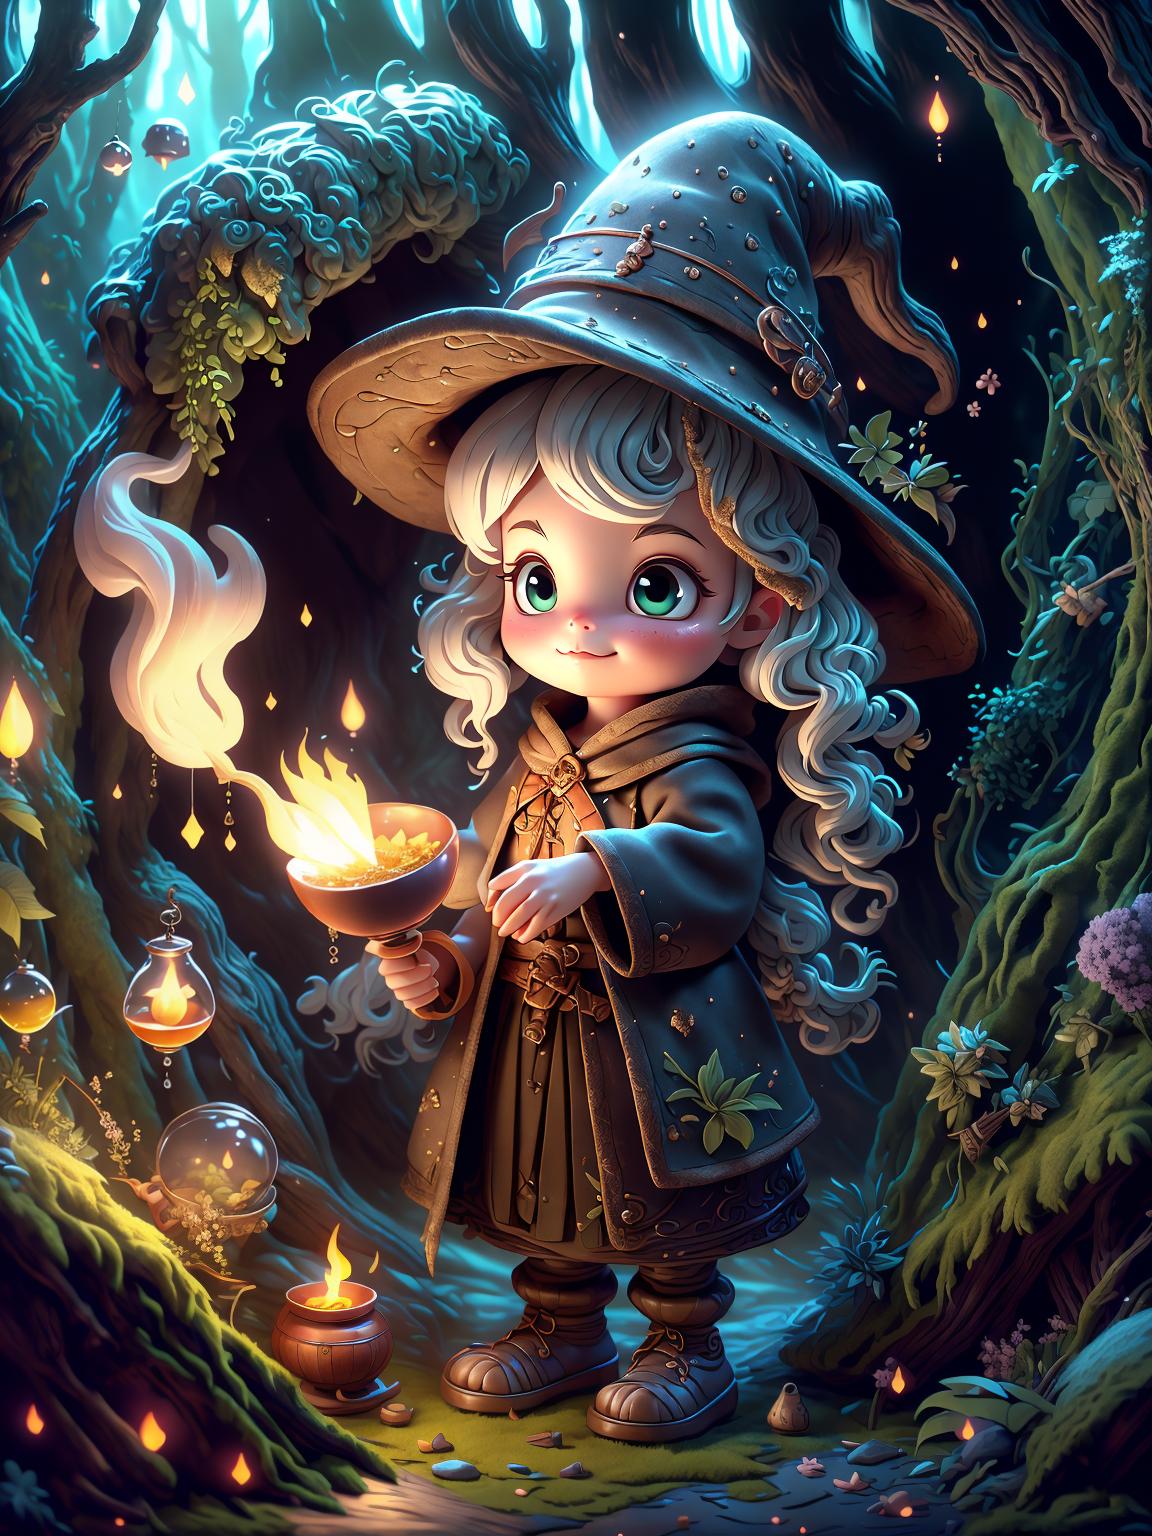  master piece, best quality, ultra detailed, highres, 4k.8k, Witch, Stirring the cauldron over a fire, Focused, BREAK Witch cooking in a cauldron, Dark forest clearing, Cauldron, wooden spoon, potion bottles, herbs, BREAK Mysterious and mystical, Glowing and bubbling cauldron, wisps of smoke, Cu73Cre4ture